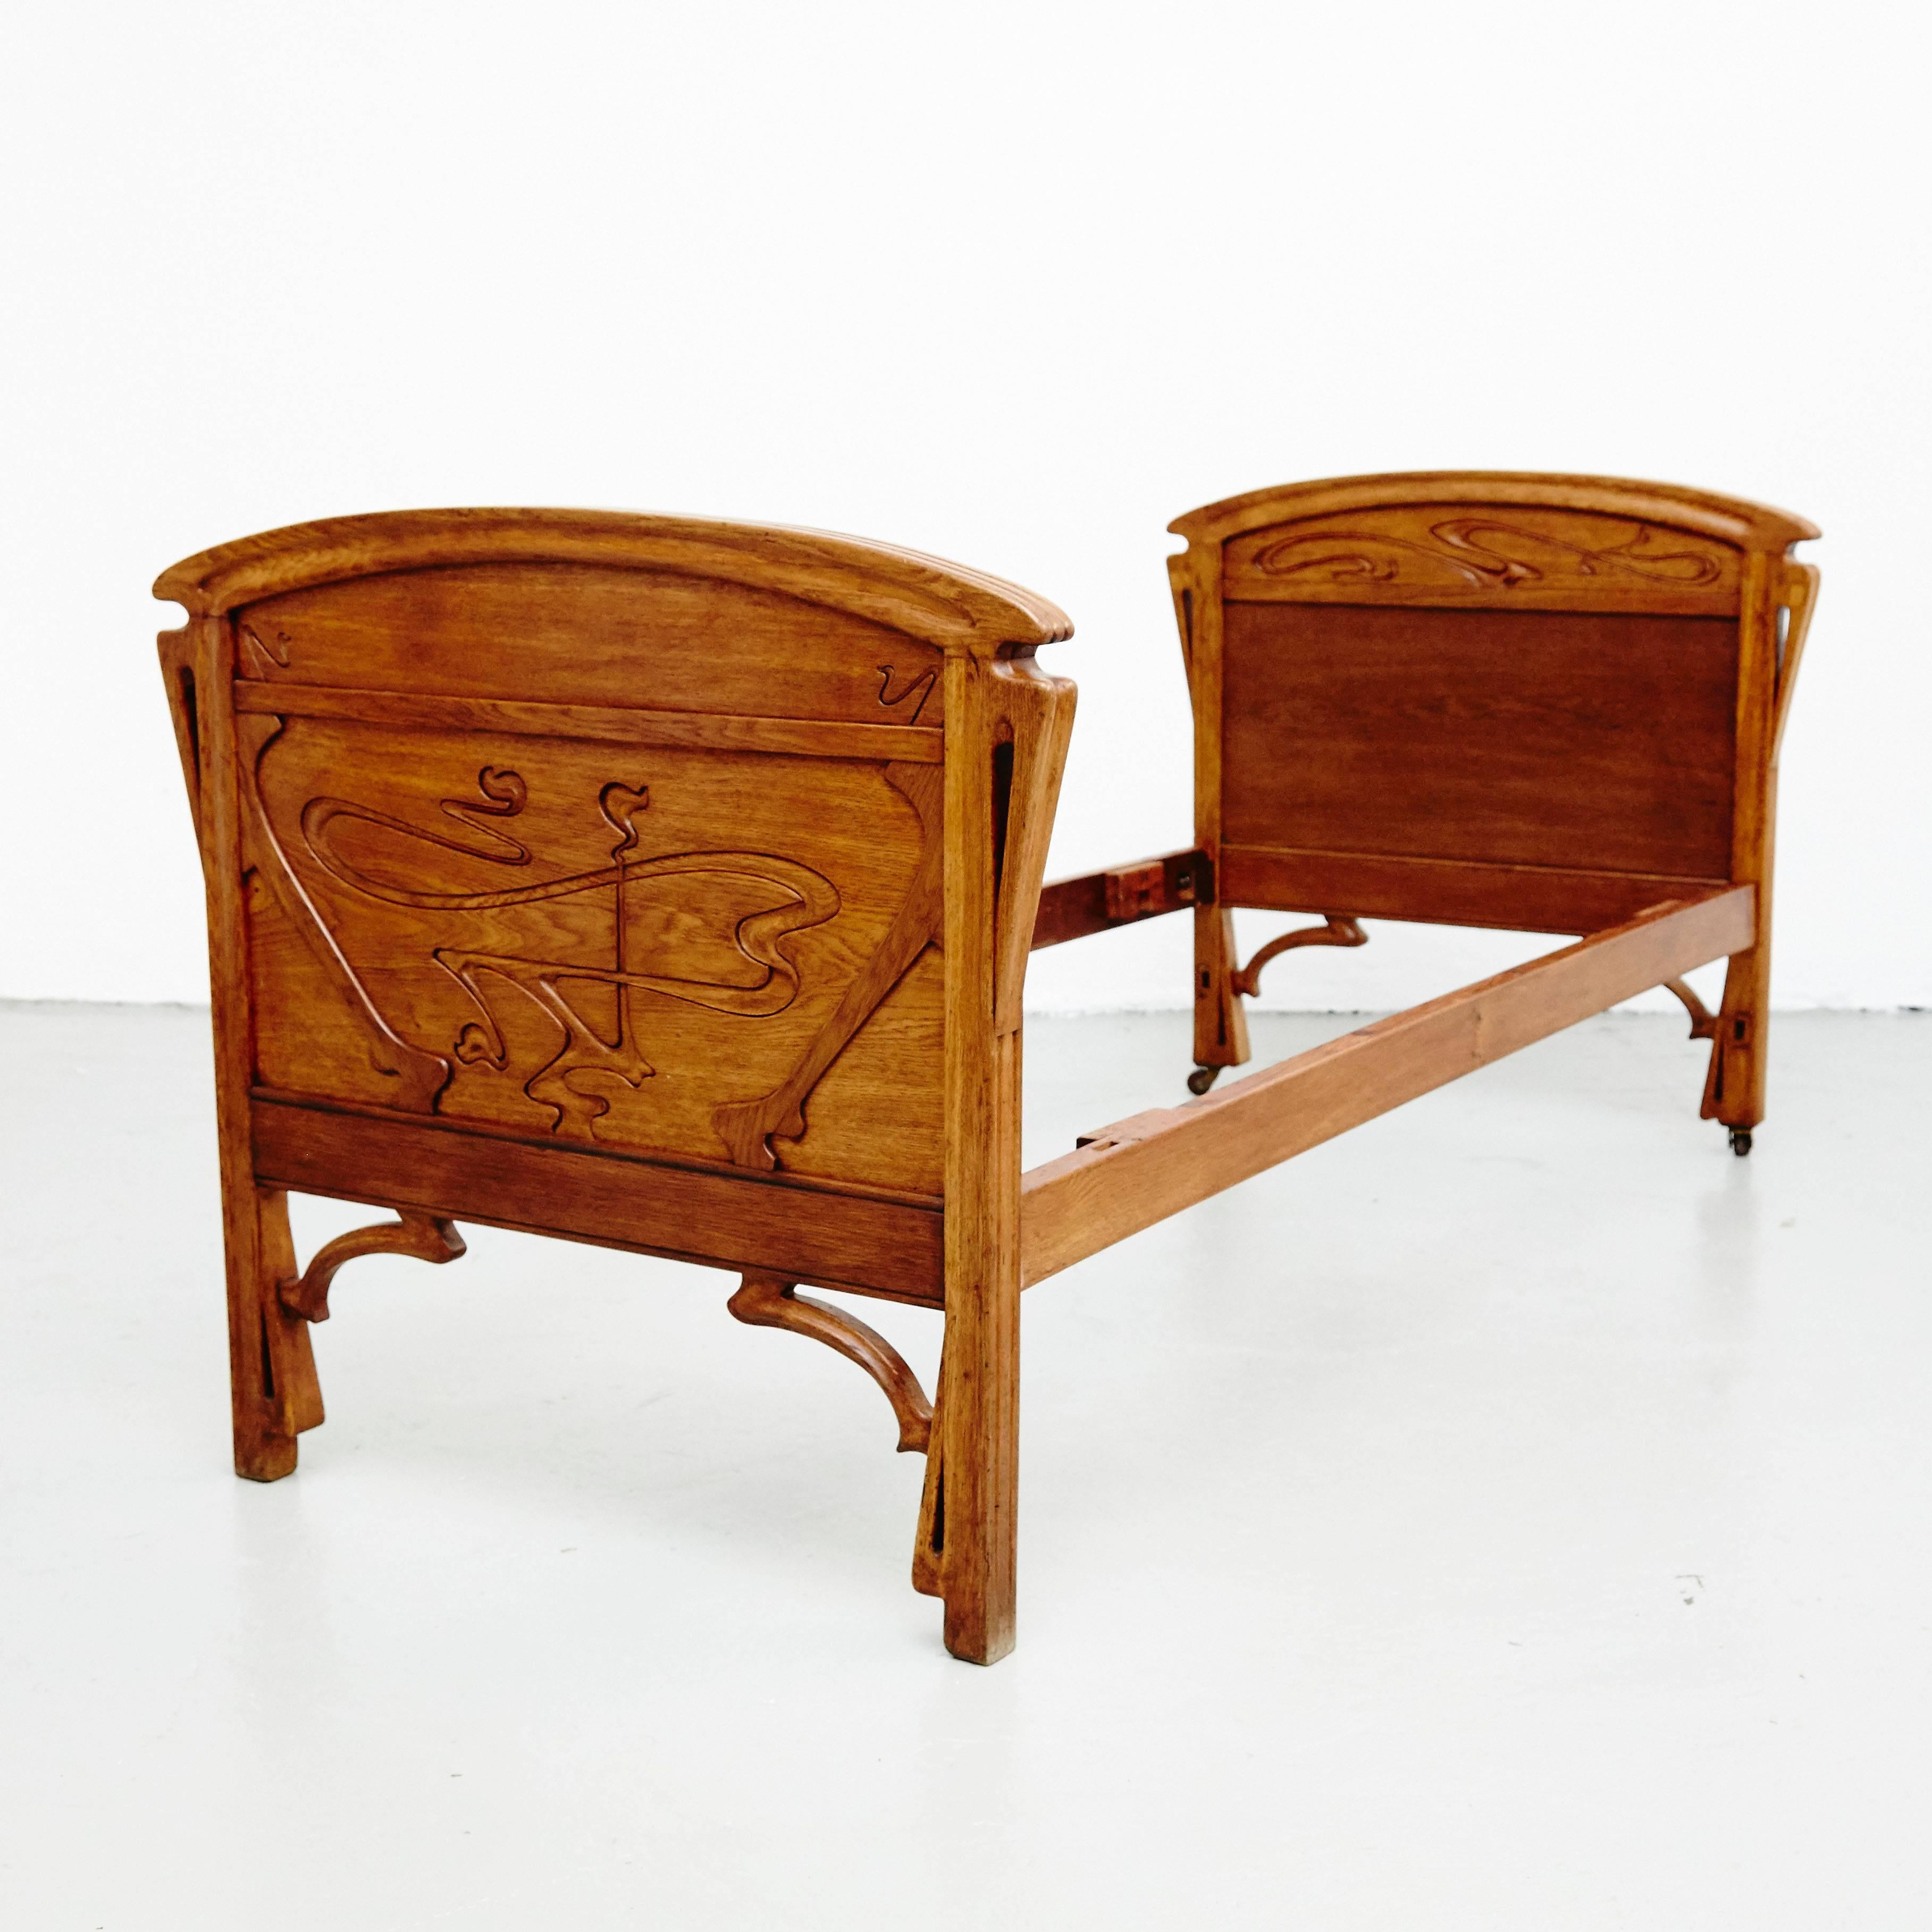 Catalan modernist bed by unknown designer in Barcelona (Spain), circa 1900

Oak

In good original condition, with minor wear consistent with age and use, preserving a nice patina .